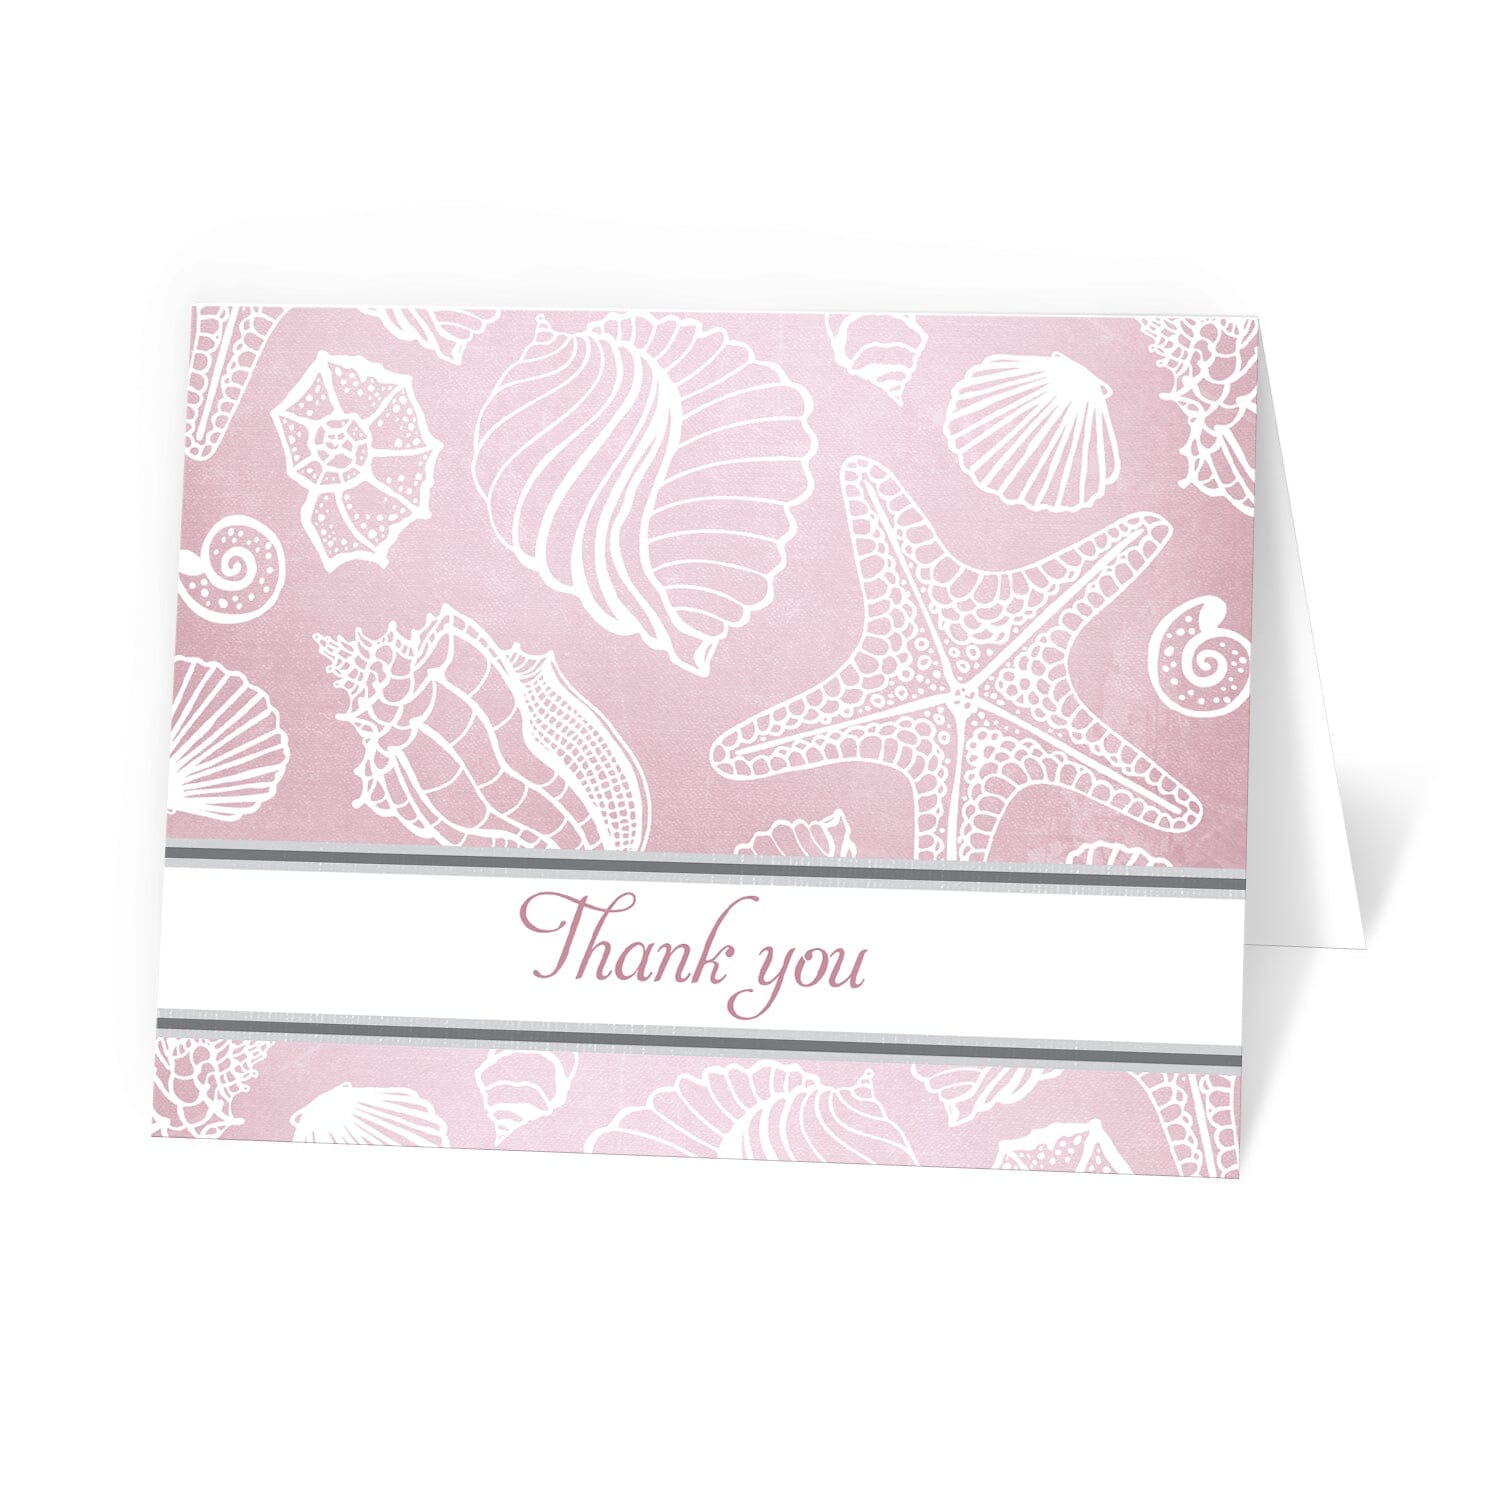 Pink Beach Seashells Pattern Thank You Cards at Artistically Invited.